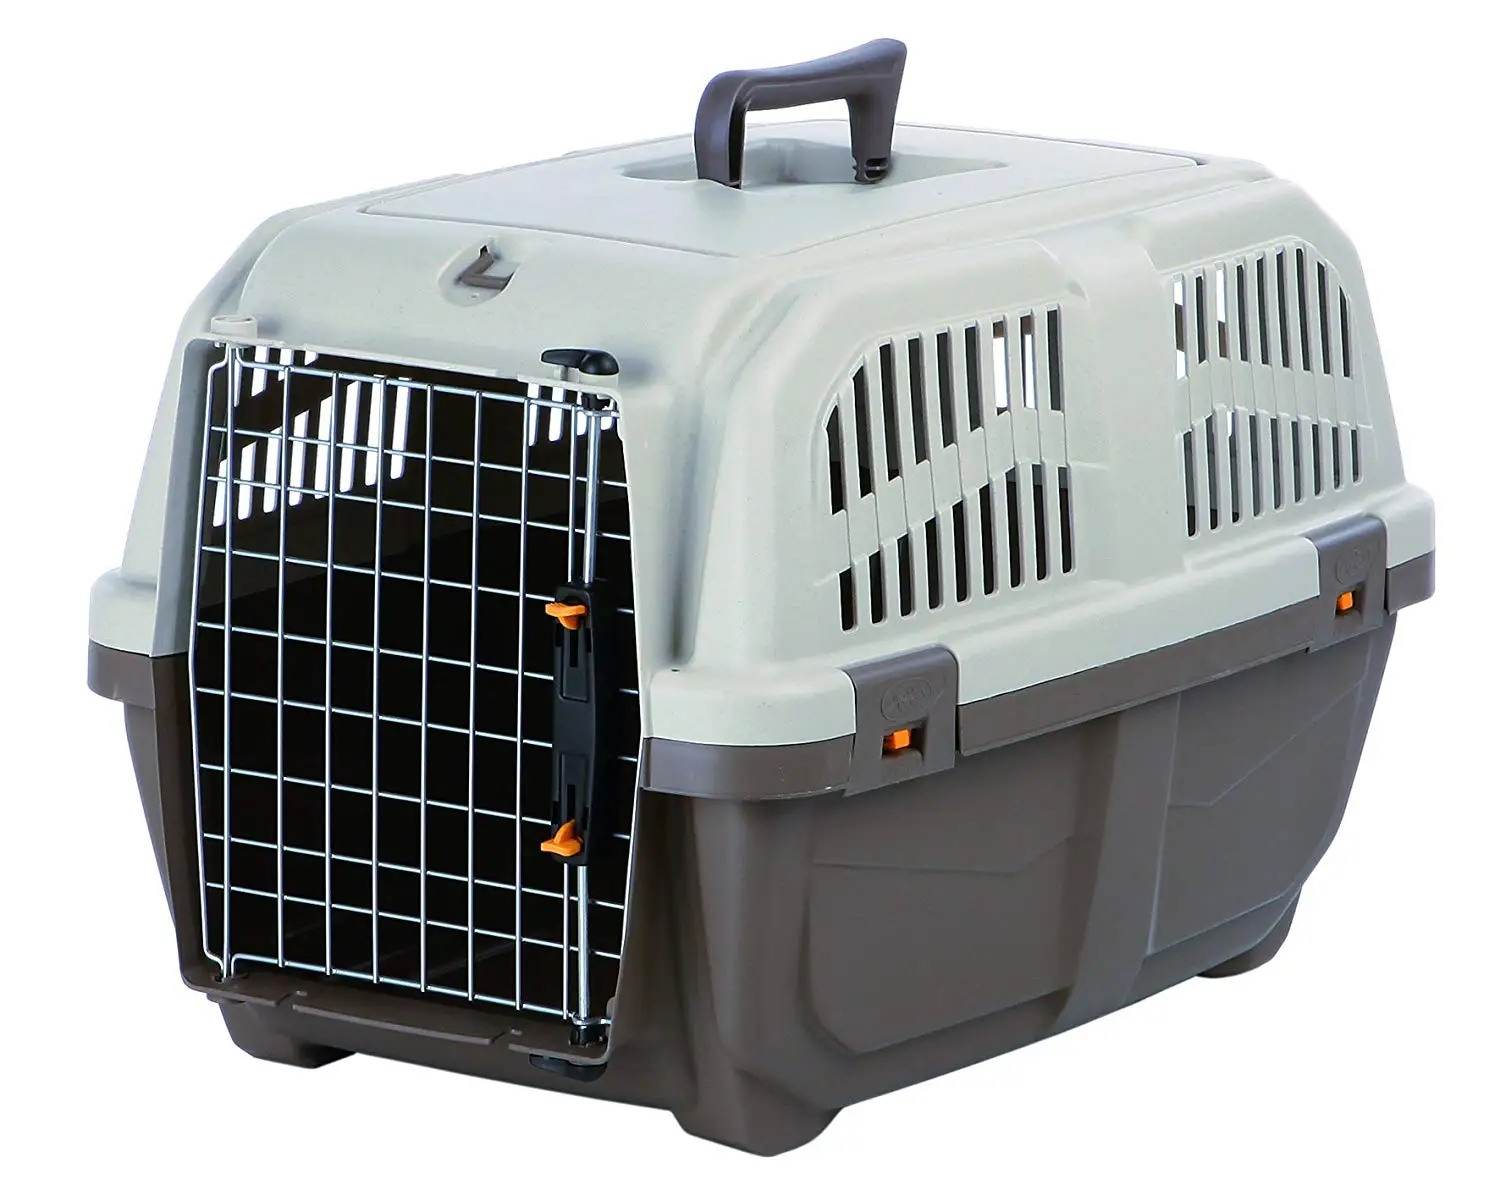 

IATA Standard Airline Approved Pet Kennel Shipping Animal Travel Transport Cage Crates Carry Dog Cat Car Box Carrier Crates